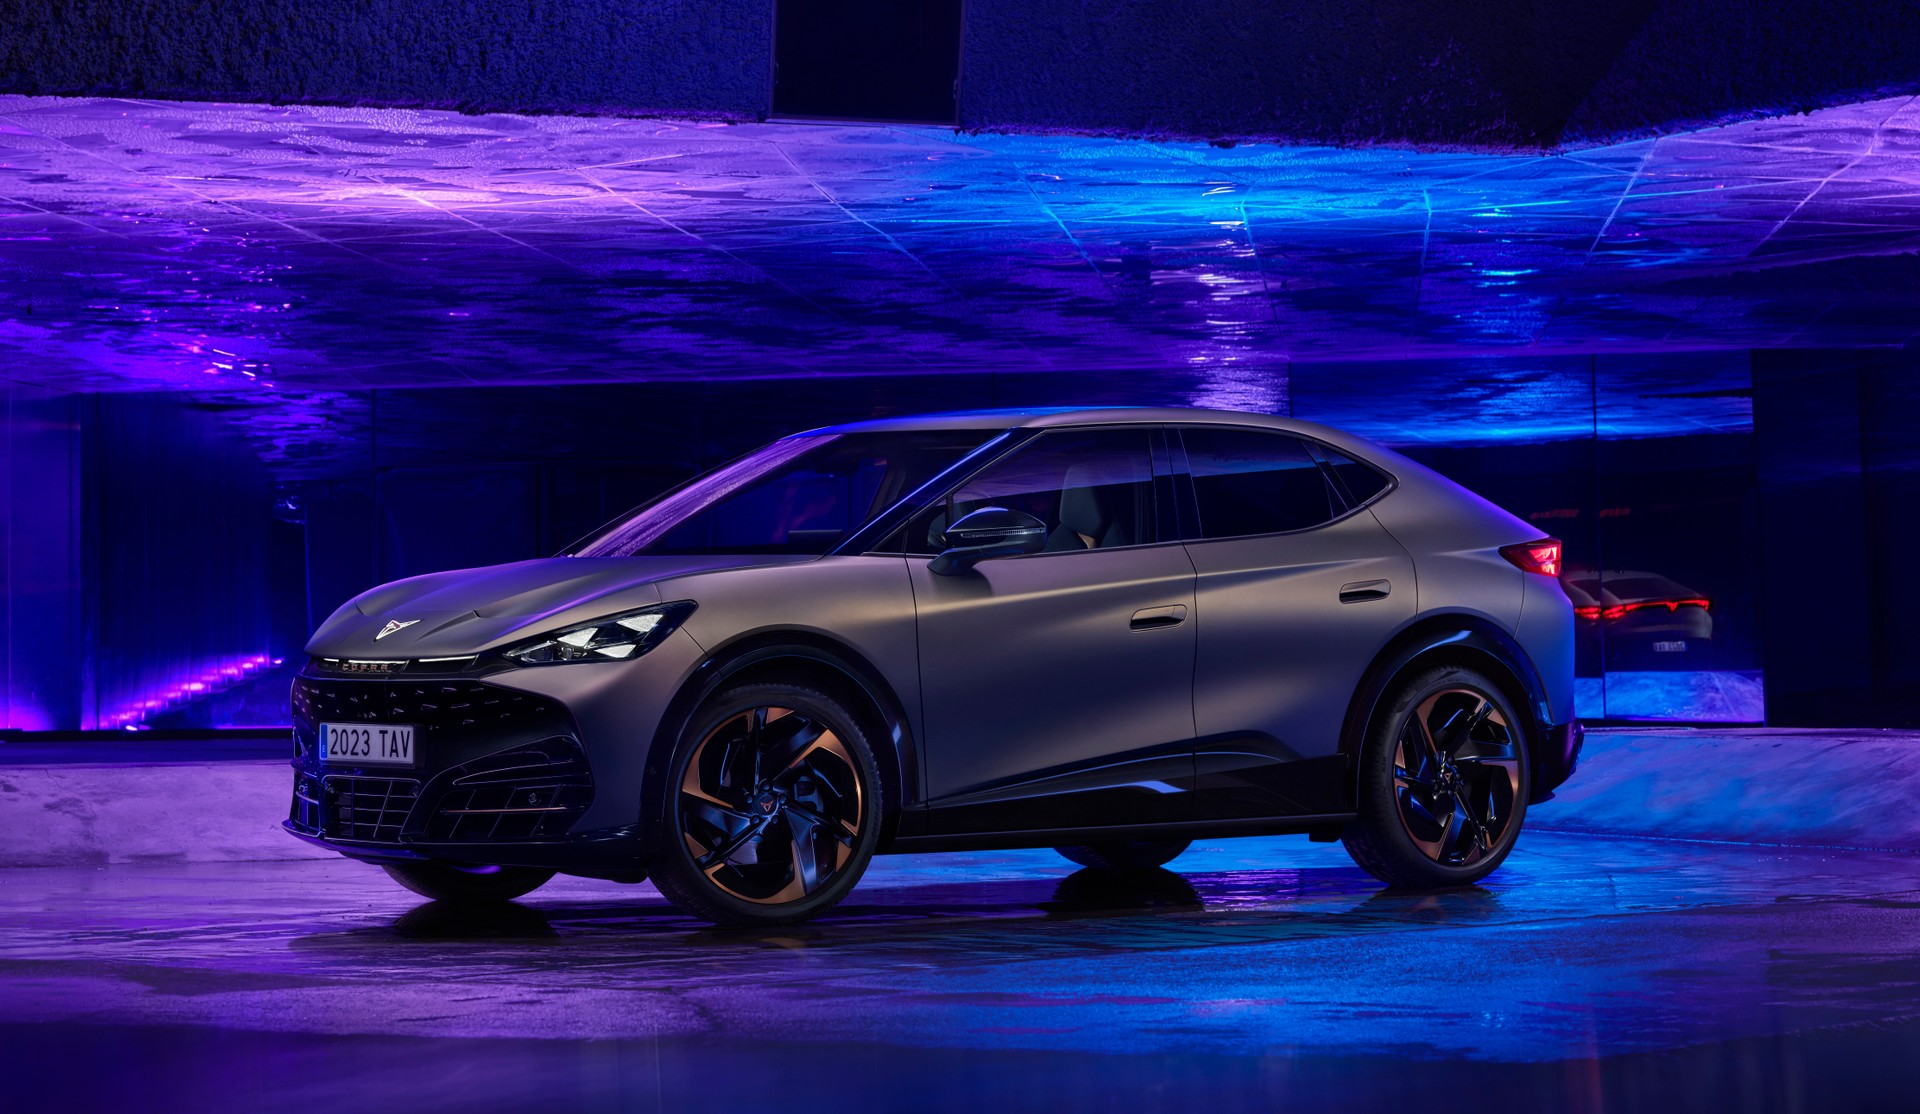 Cobra Tavascan, here is the new electric SUV